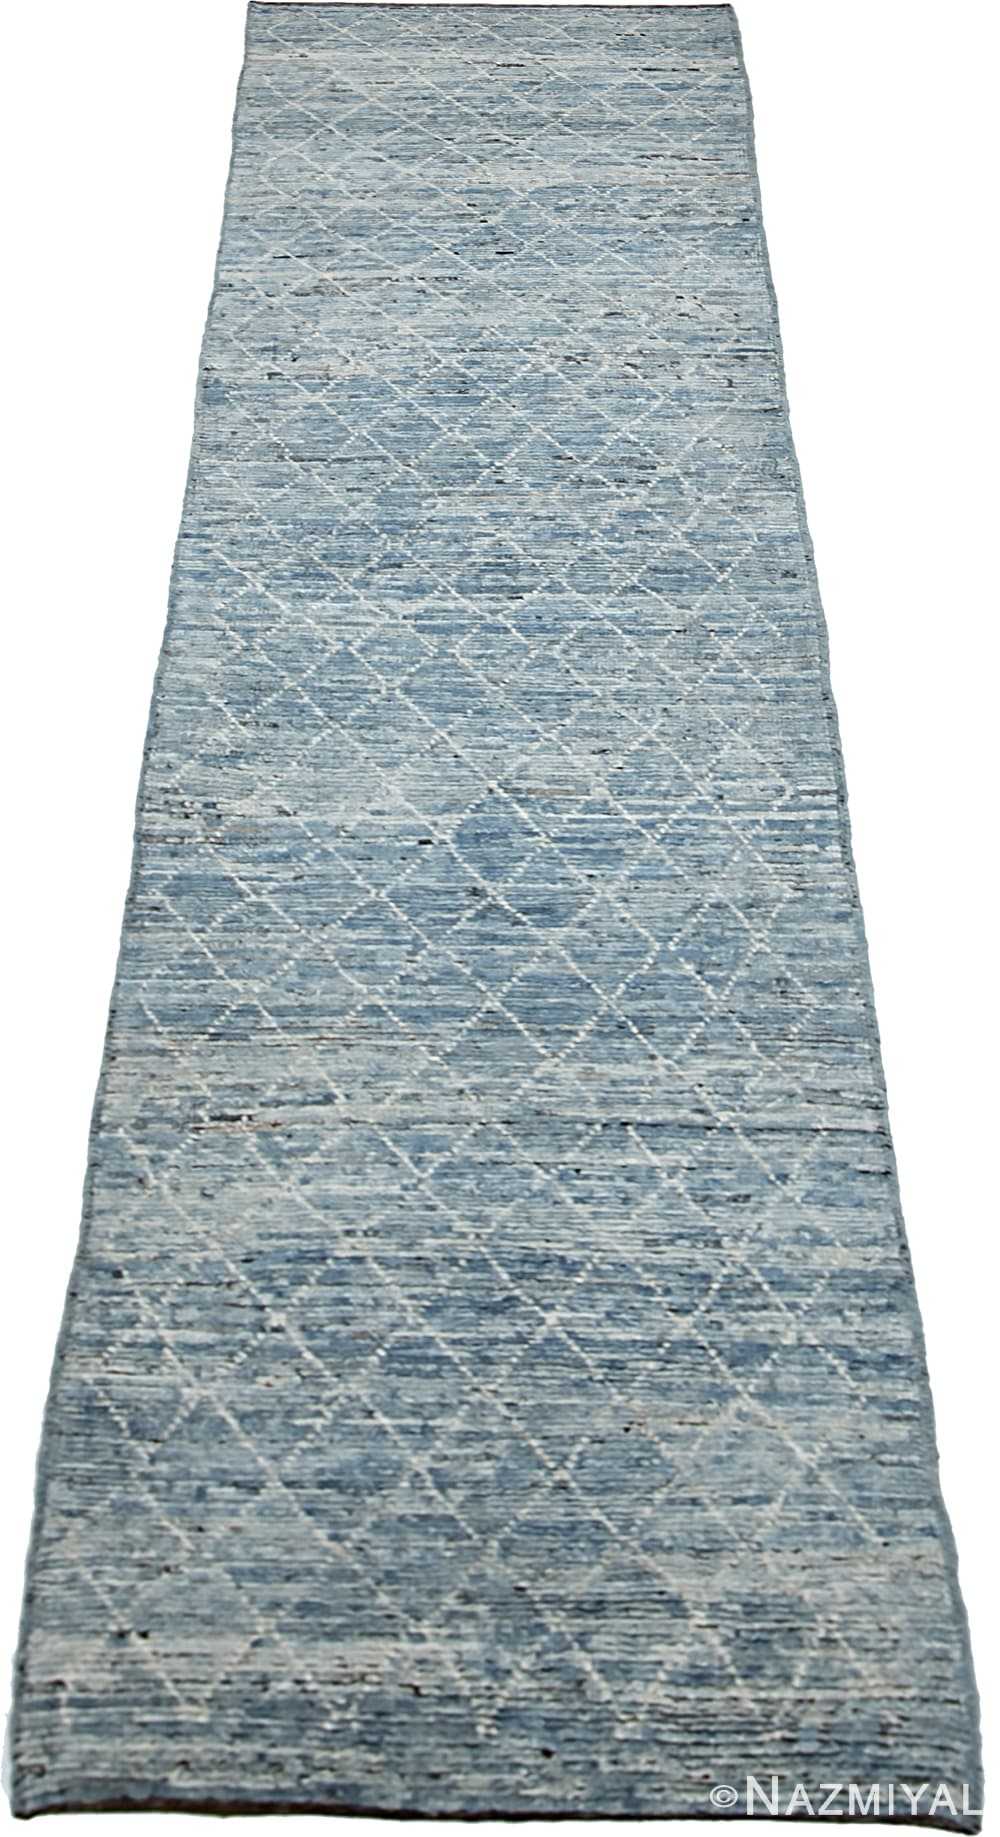 Whole View Of Light Blue Modern Moroccan Style Afghan Runner Rug 60146 by Nazmiyal NYC